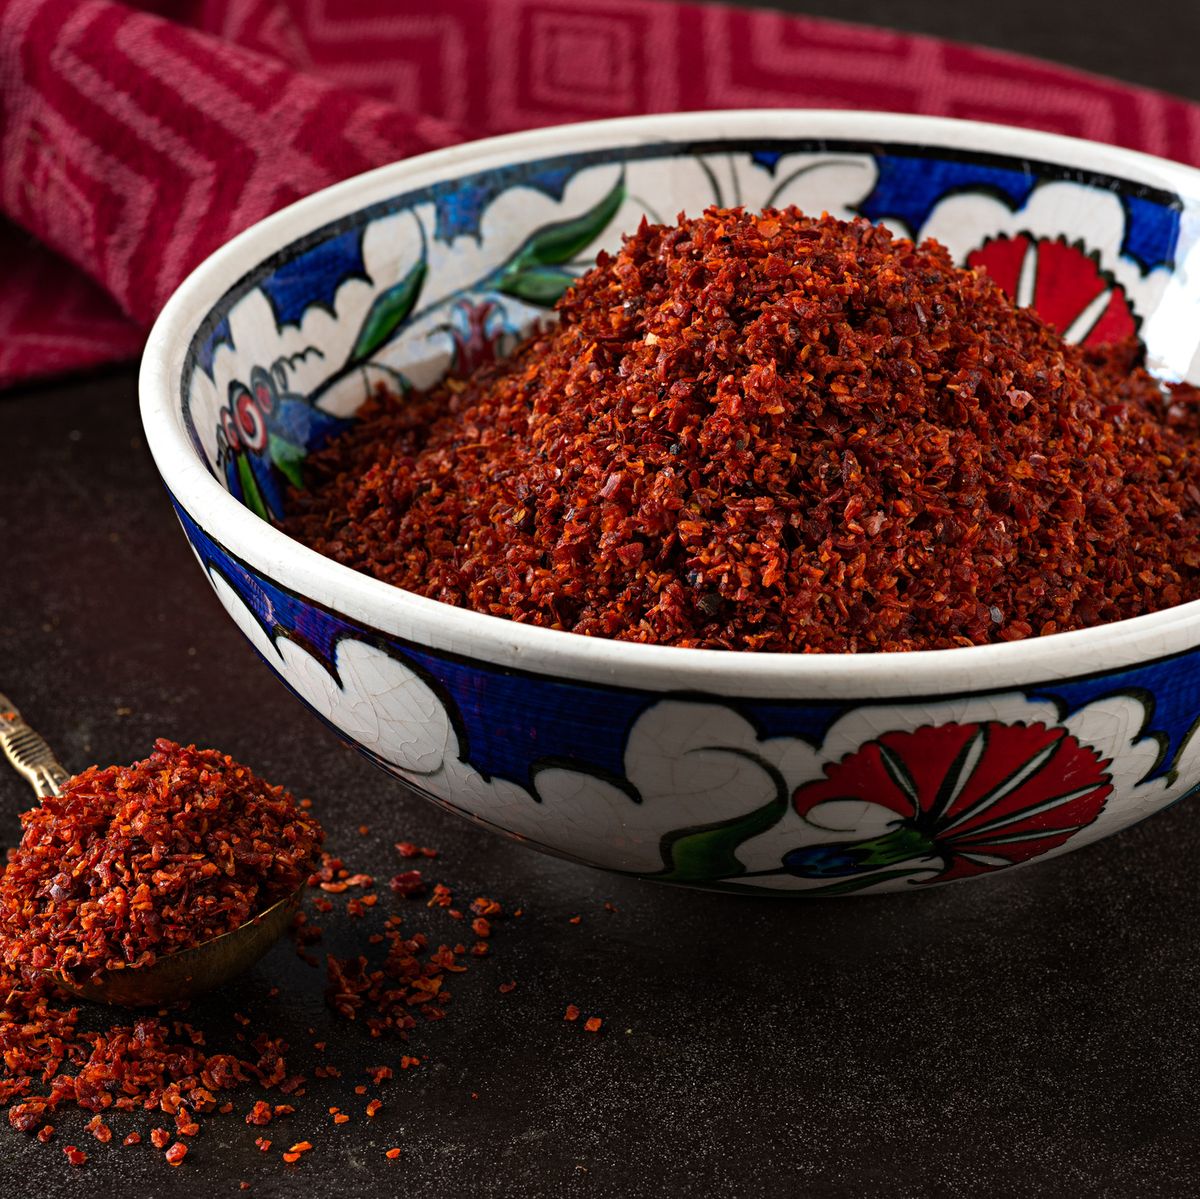 You'll Want to Use This Paprika Spice Blend on Everything